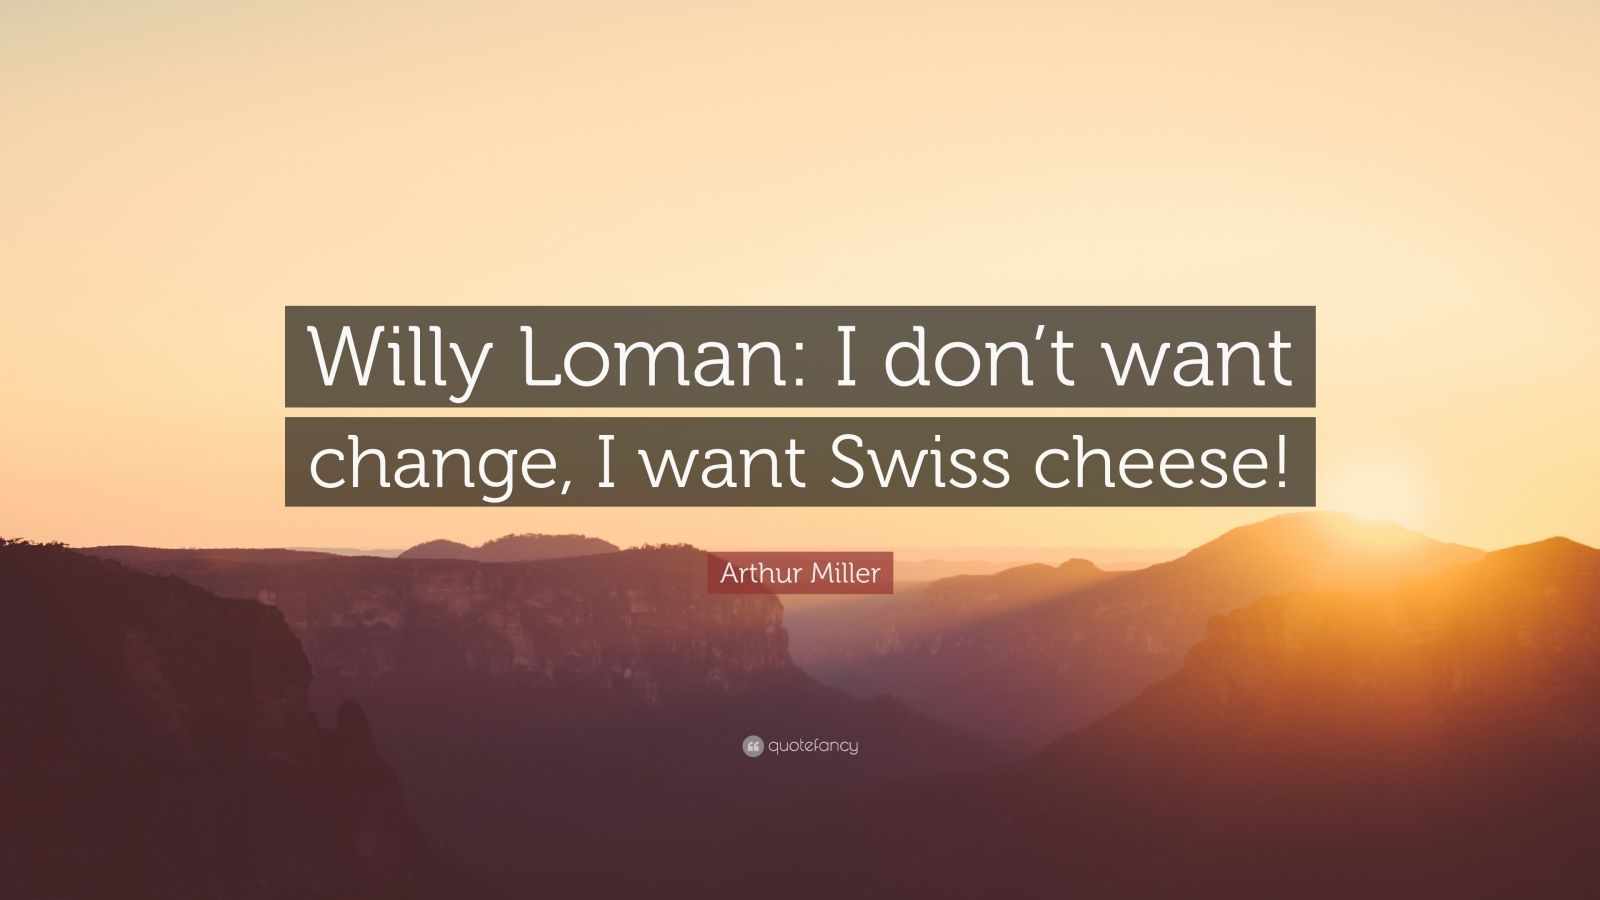 biff loman quotes about willy